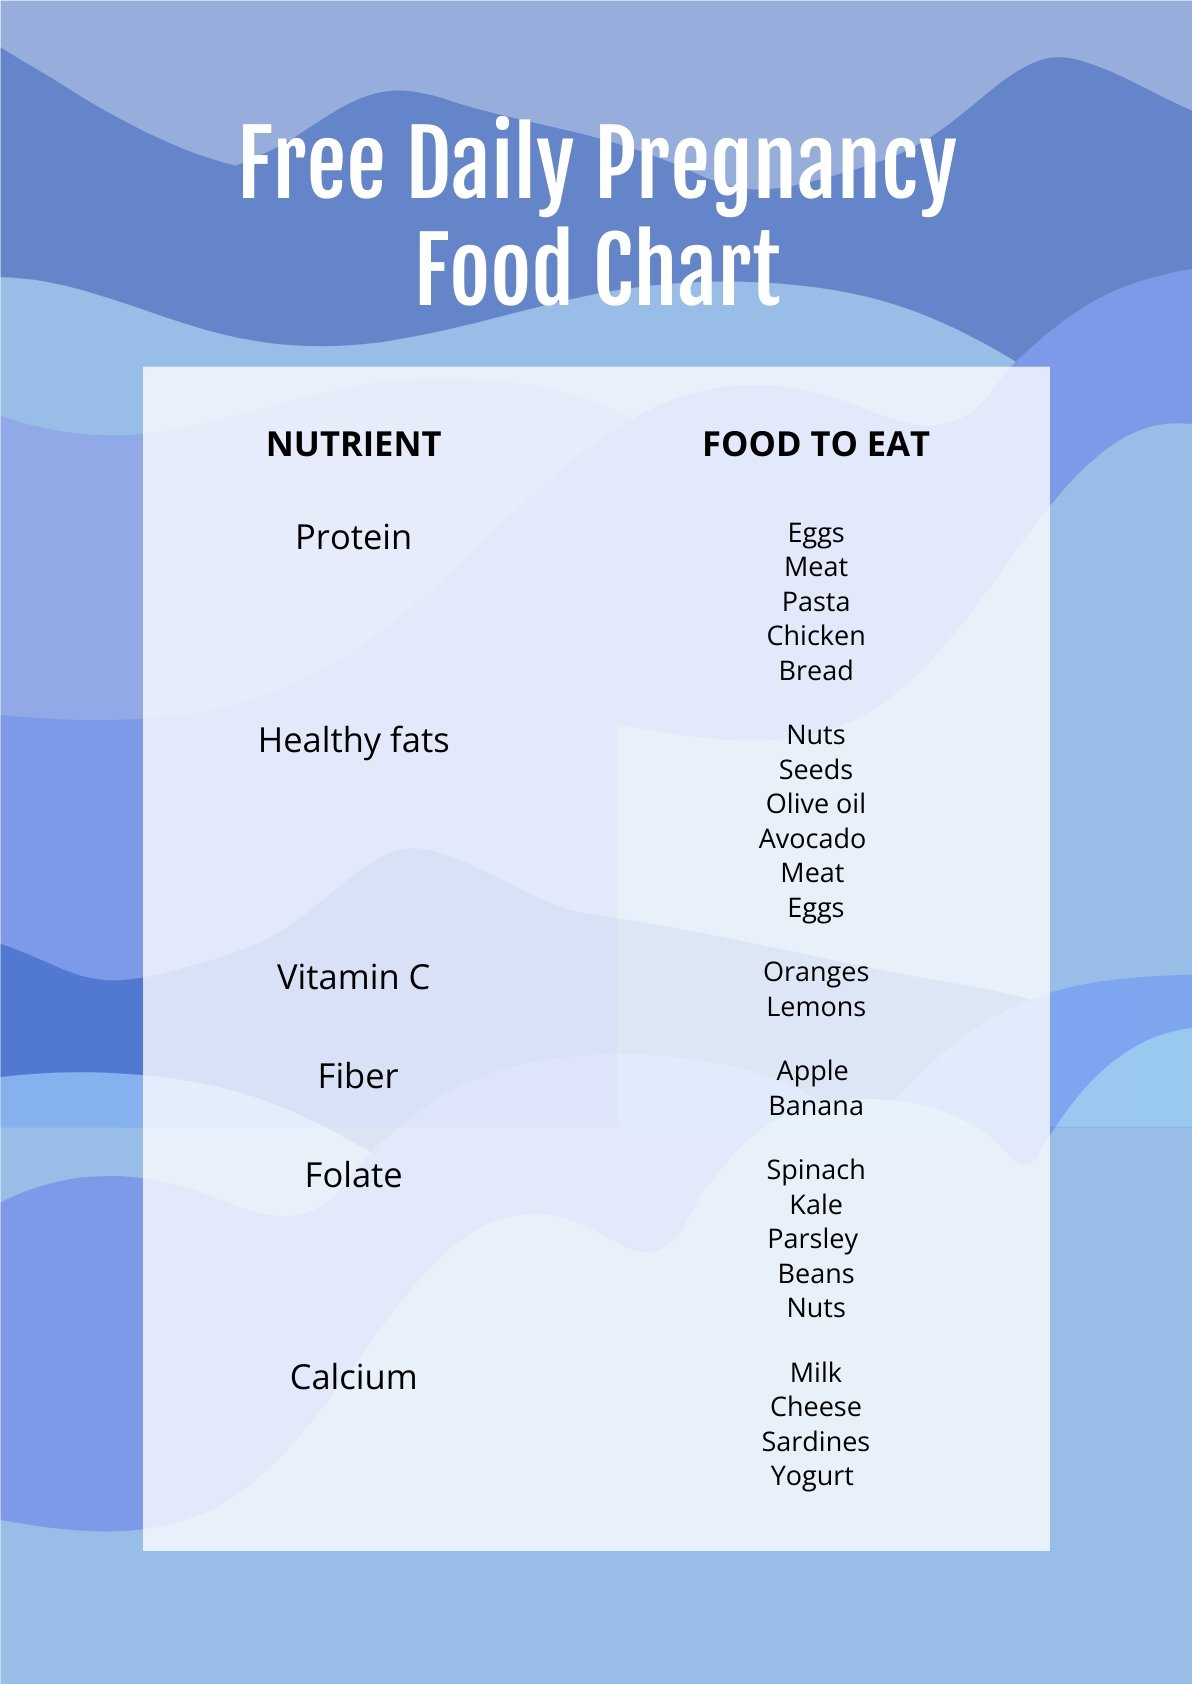 Daily Pregnancy Food Chart